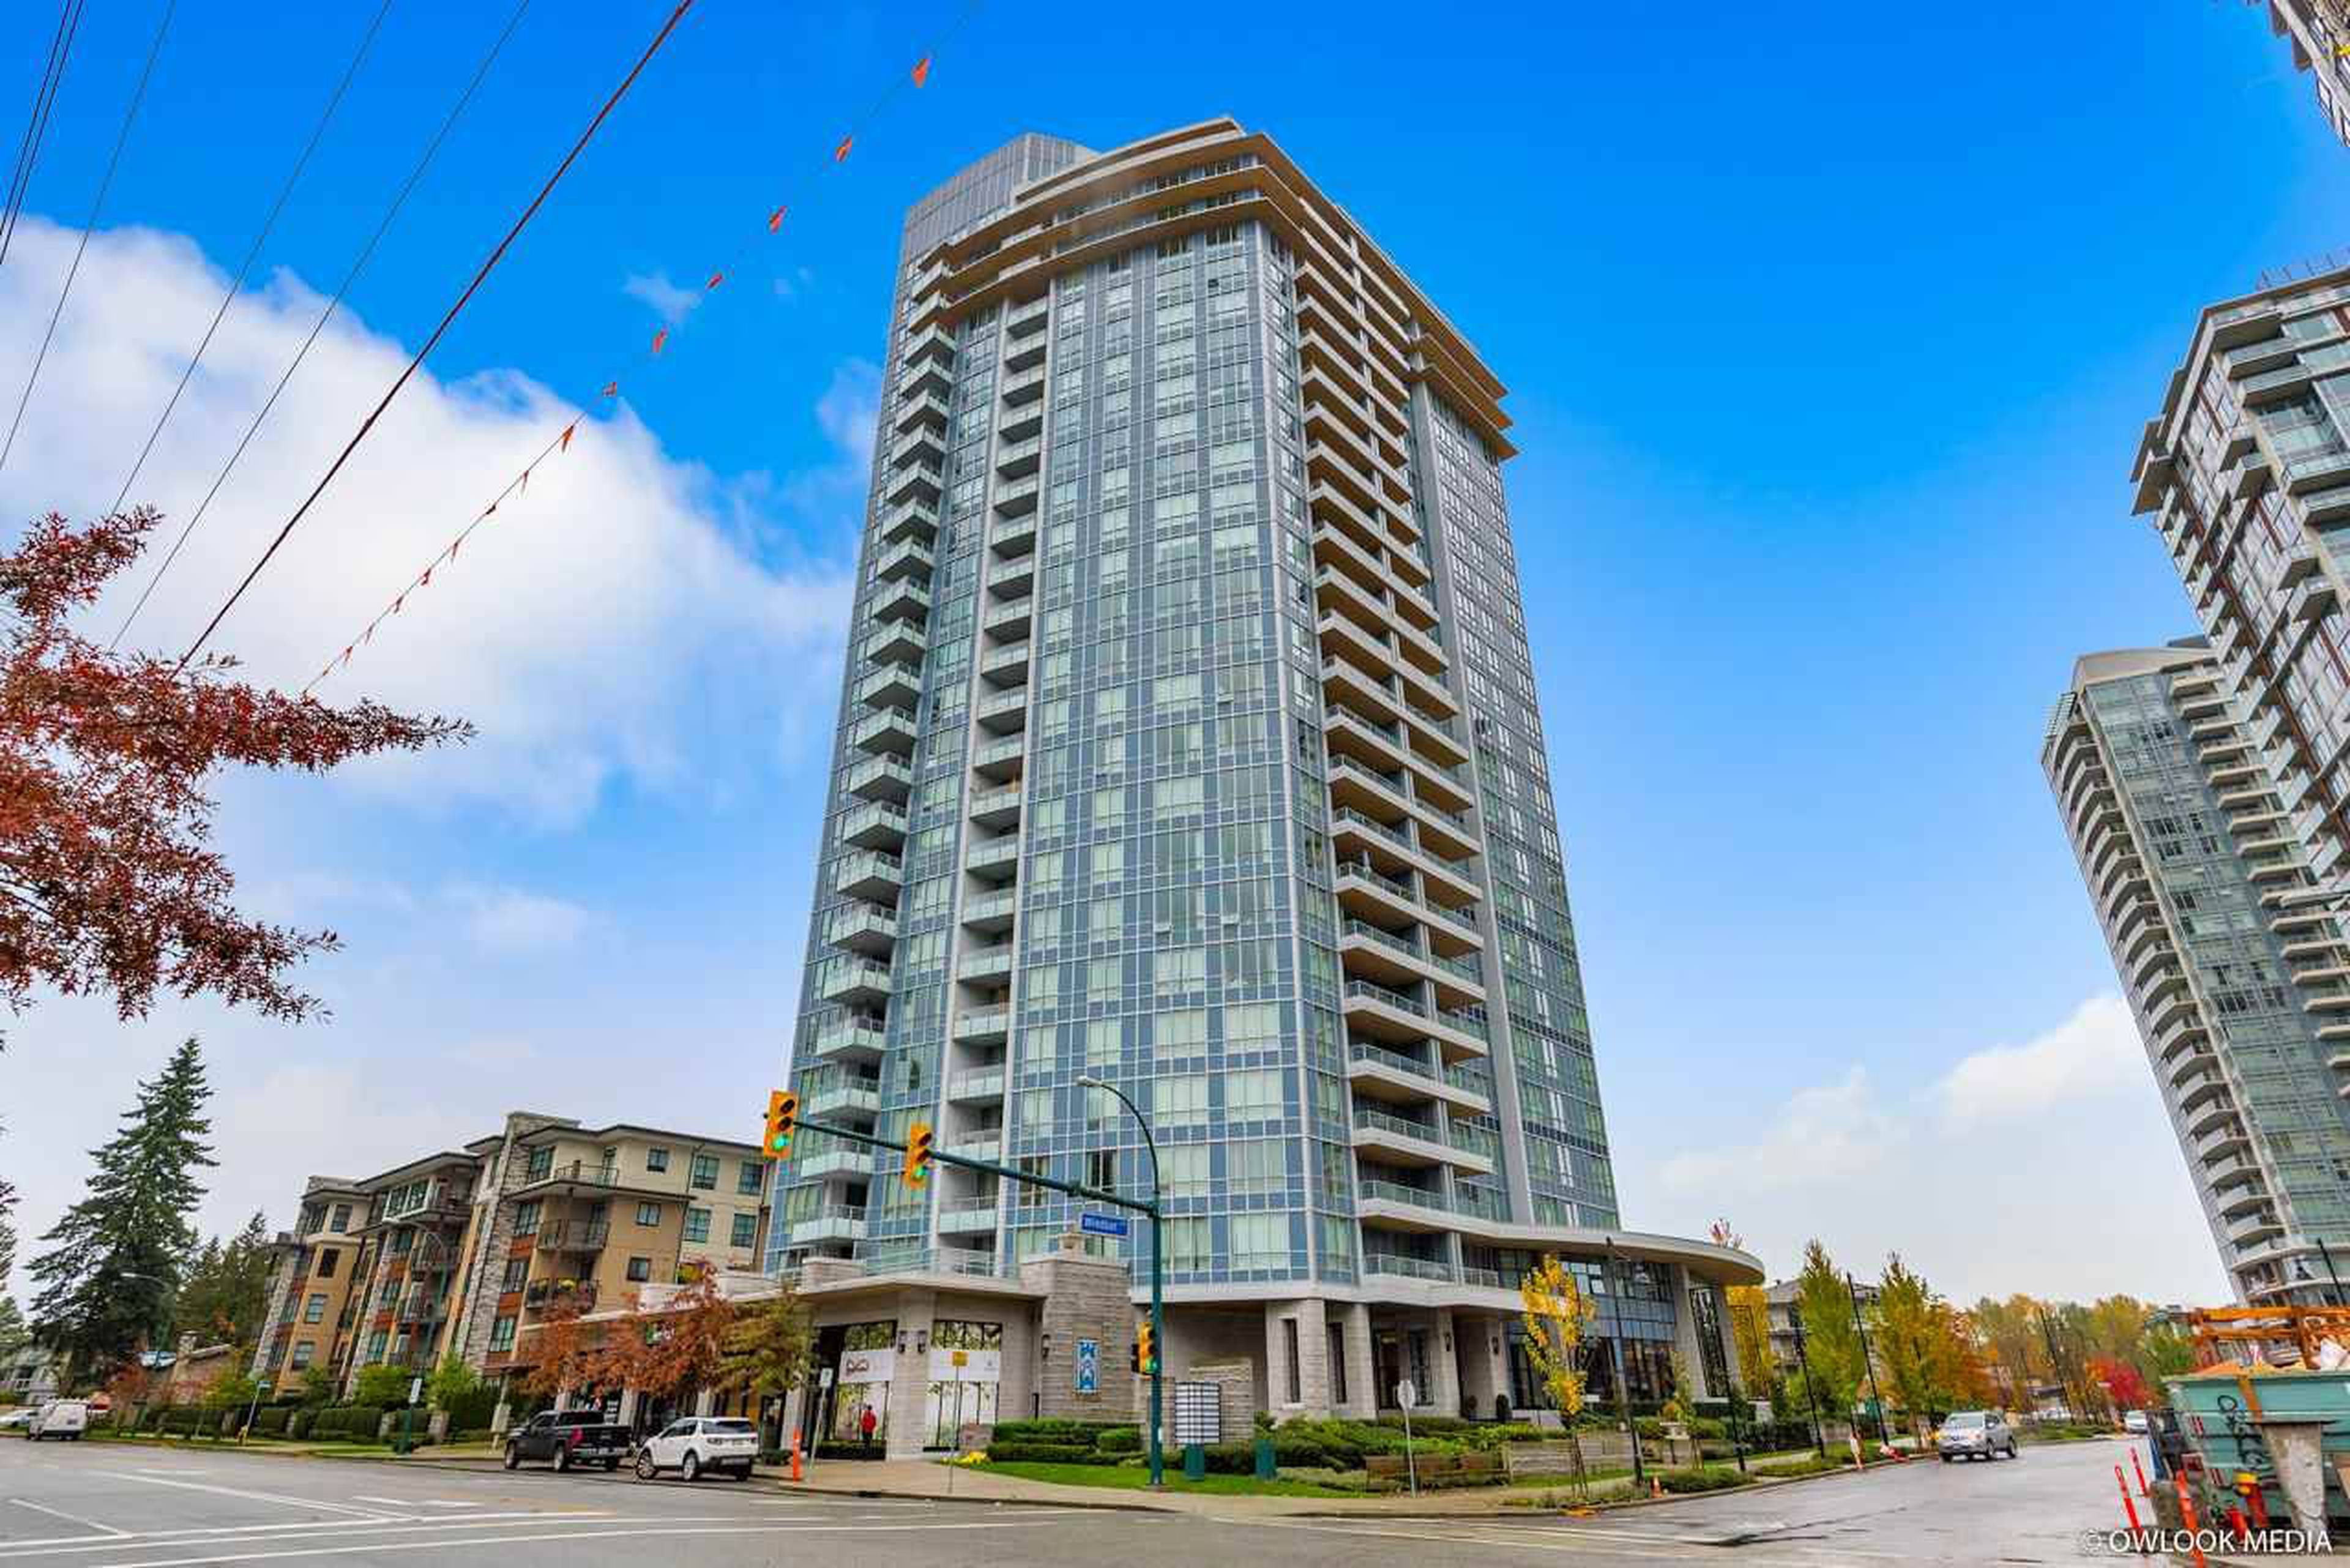 The Windsor 3093 Windsor Gate - Apartments for Rent Coquitlam | liv.rent